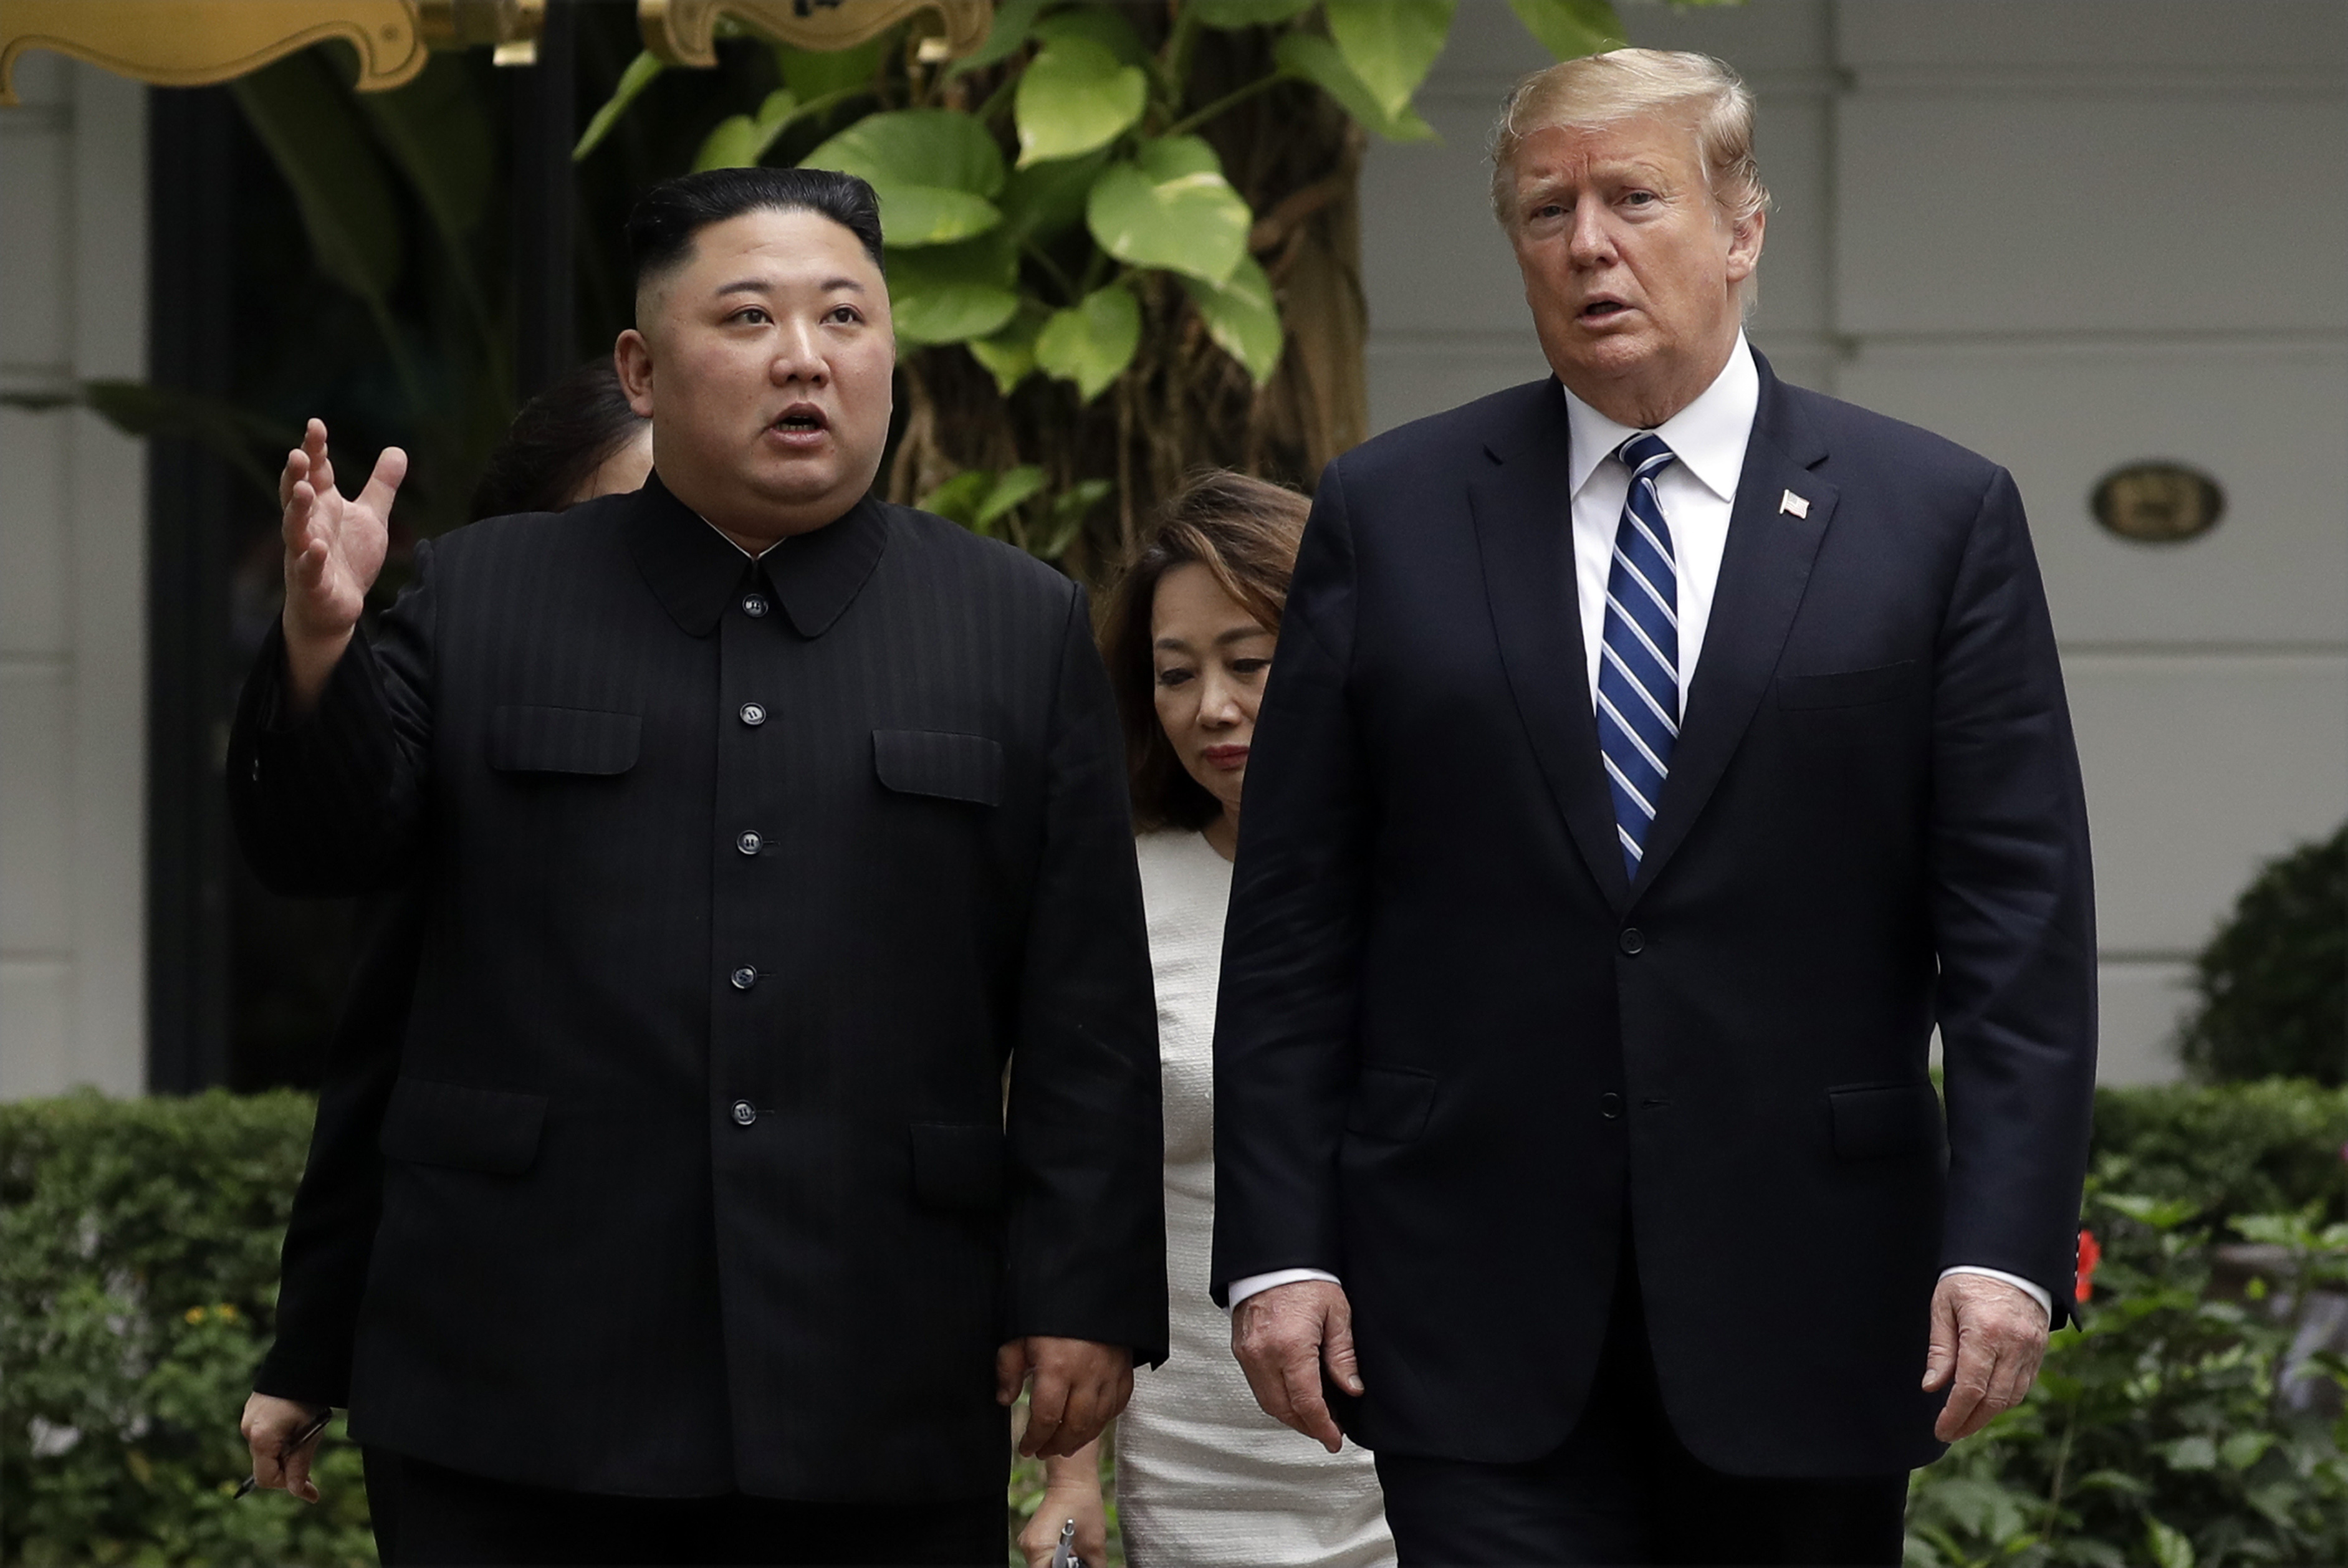 FILE - In this Thursday, Feb. 28, 2019, file photo, President Donald Trump and North Korean leader Kim Jong Un take a walk after their first meeting at the Sofitel Legend Metropole Hanoi hotel, in Hanoi. Kim says he’s open to having a third summit with Trump if the United States could offer mutually-acceptable terms for an agreement by the end of the year. (AP Photo/Evan Vucci, File)